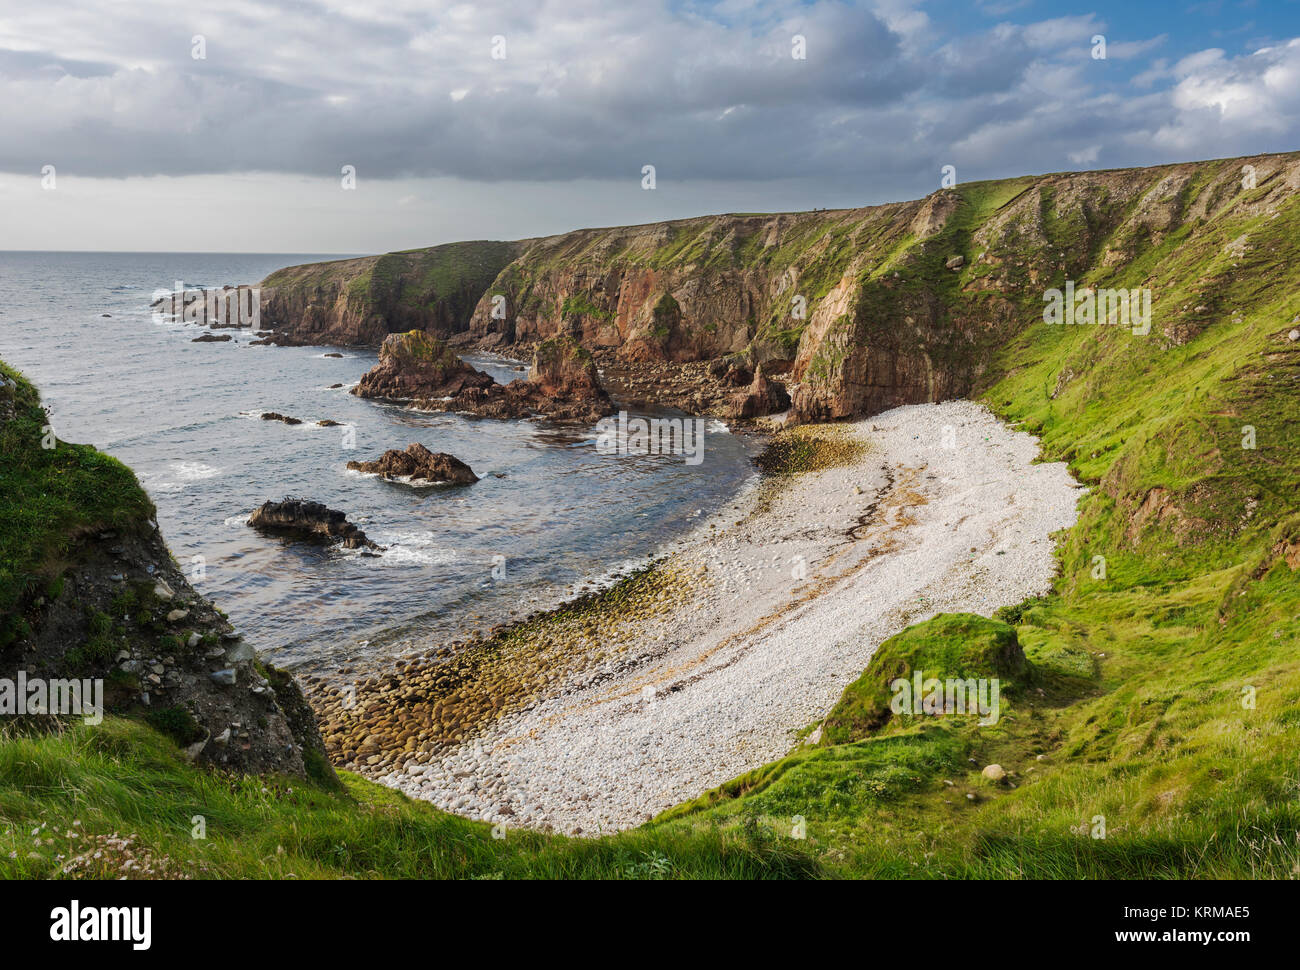 Cliffs, sea stacks, shingle beach and cove at Bloody Foreland, at the north-west tip of County Donegal, Ireland Stock Photo